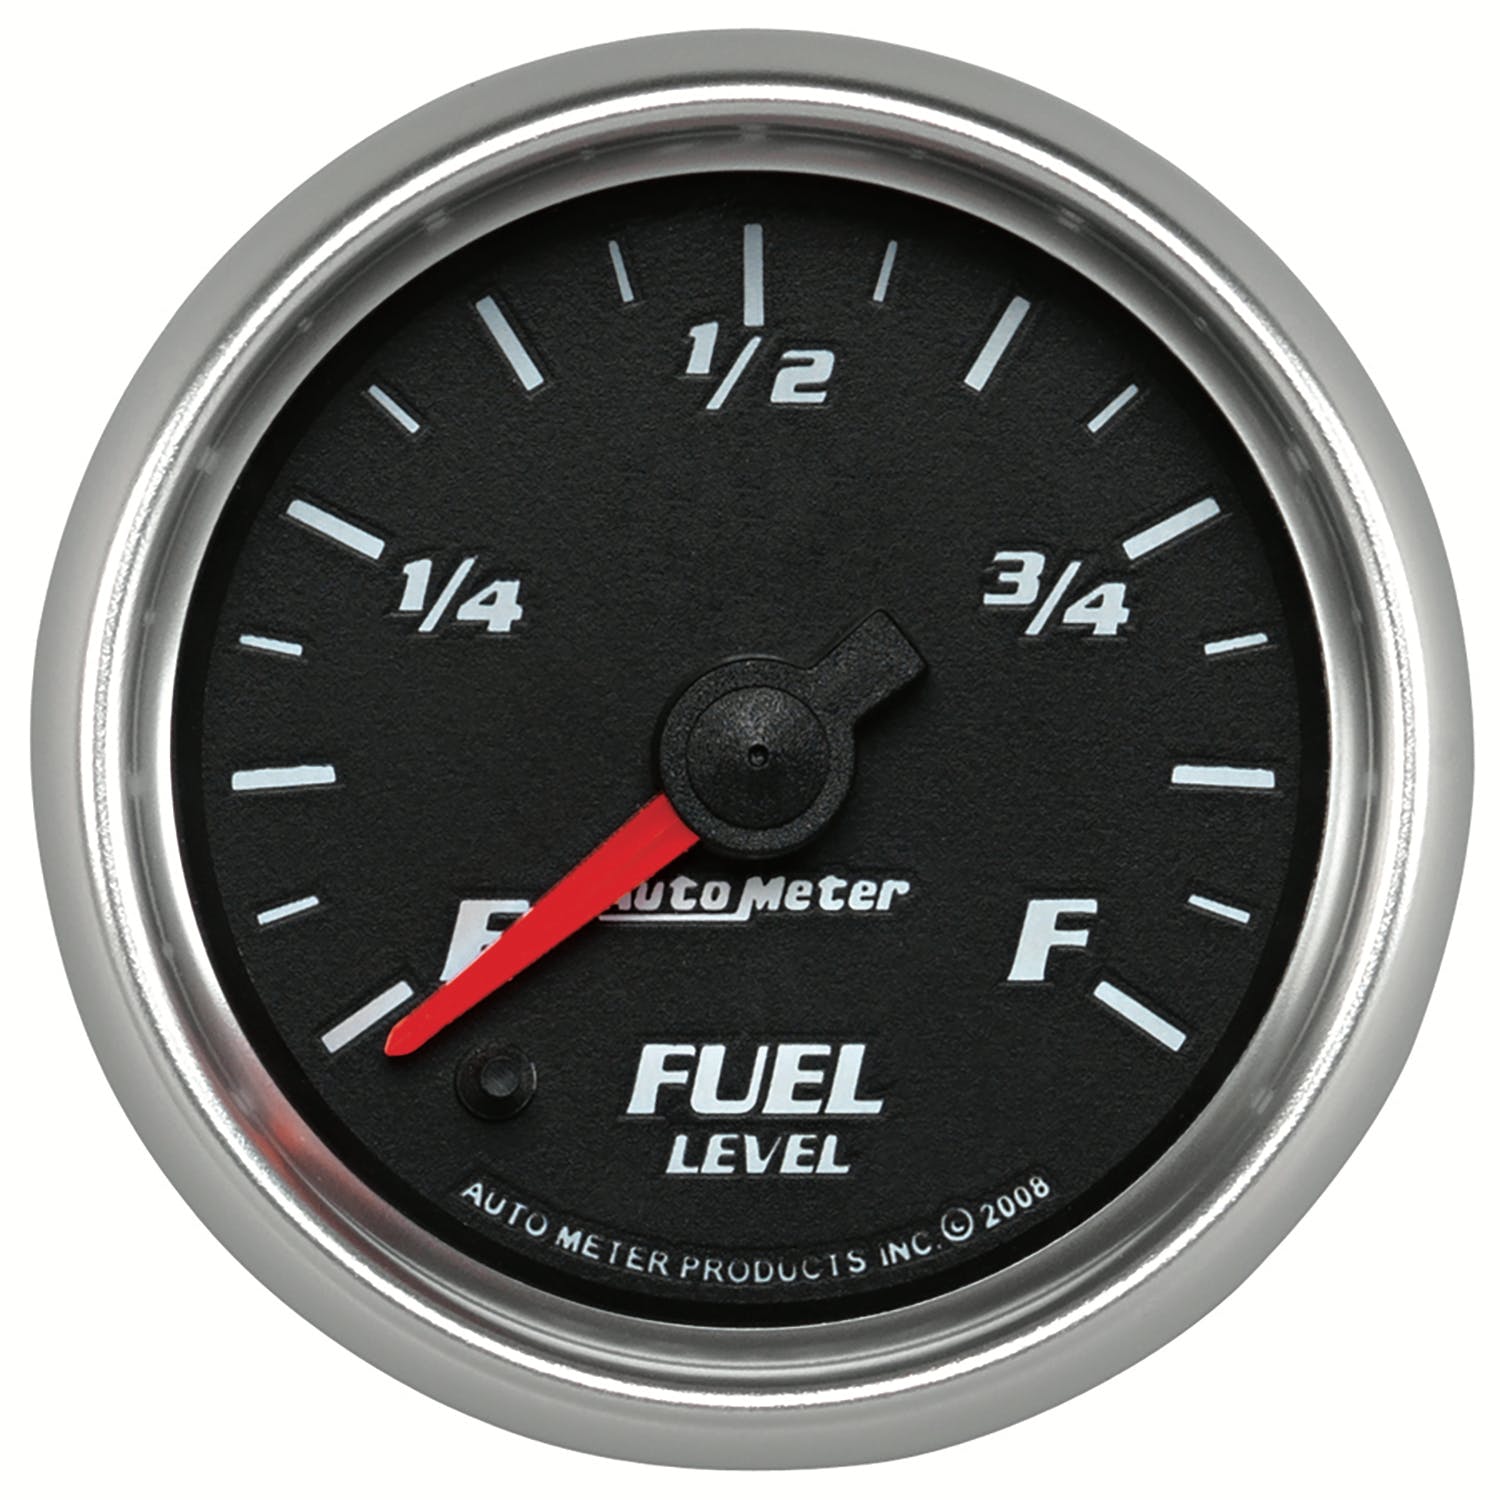 AutoMeter Products 19609 Pro-Cycle Programmable Fuel Level Gauge 2-1/16 in. 0-280OE Black